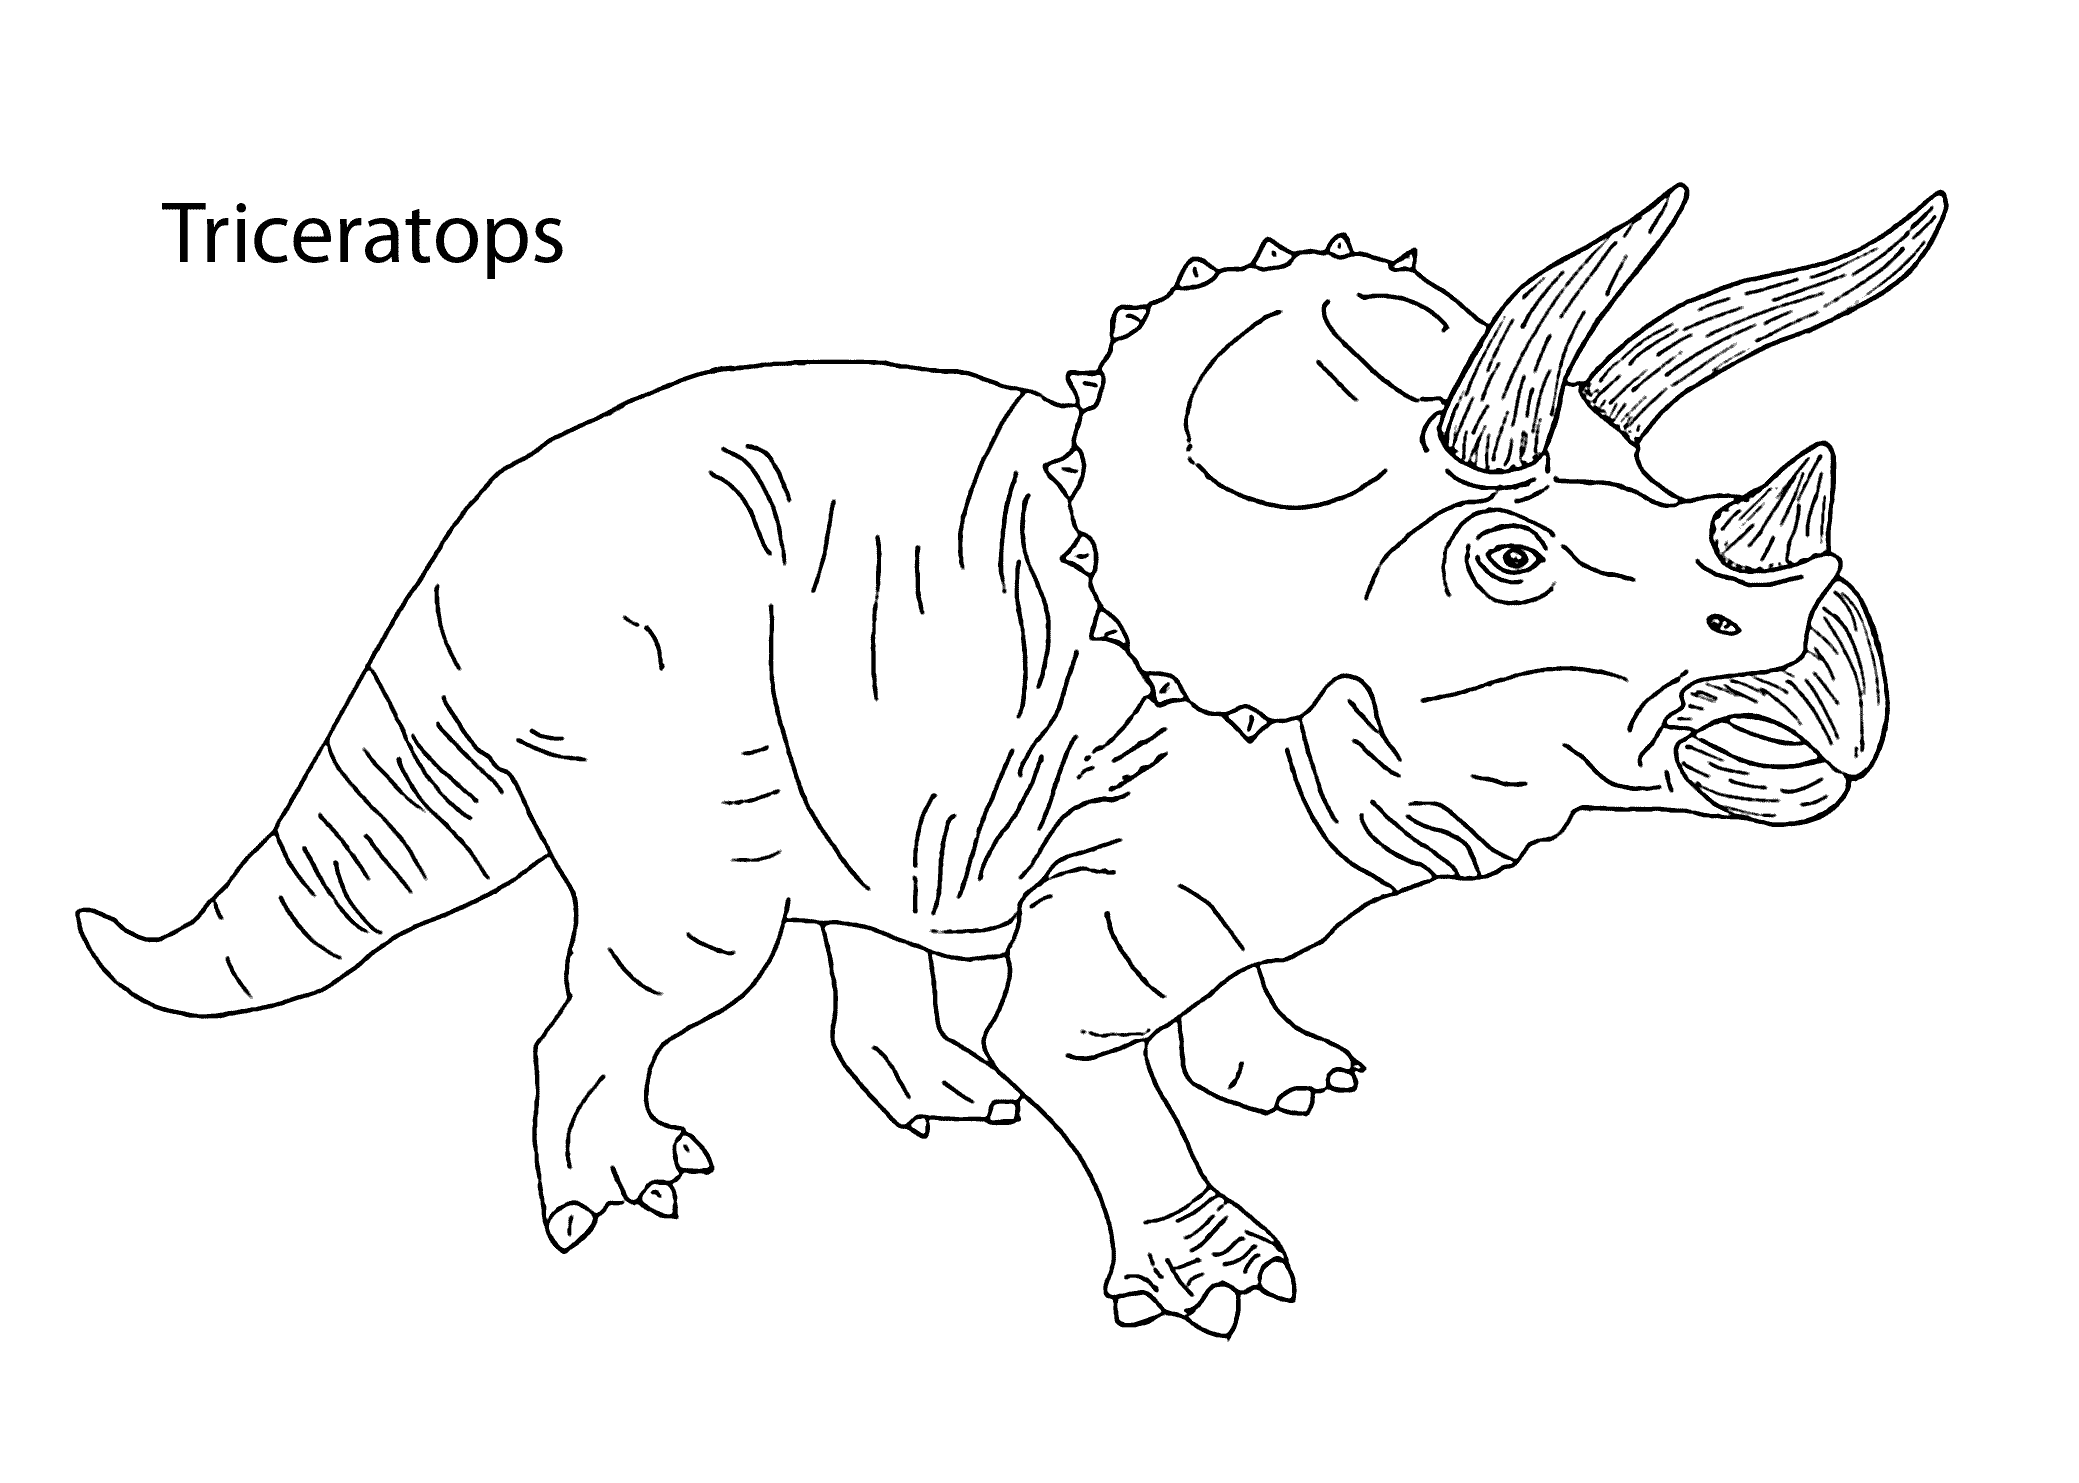 triceratops pictures to color triceratops dinosaur coloring pages for kids printable color to triceratops pictures 